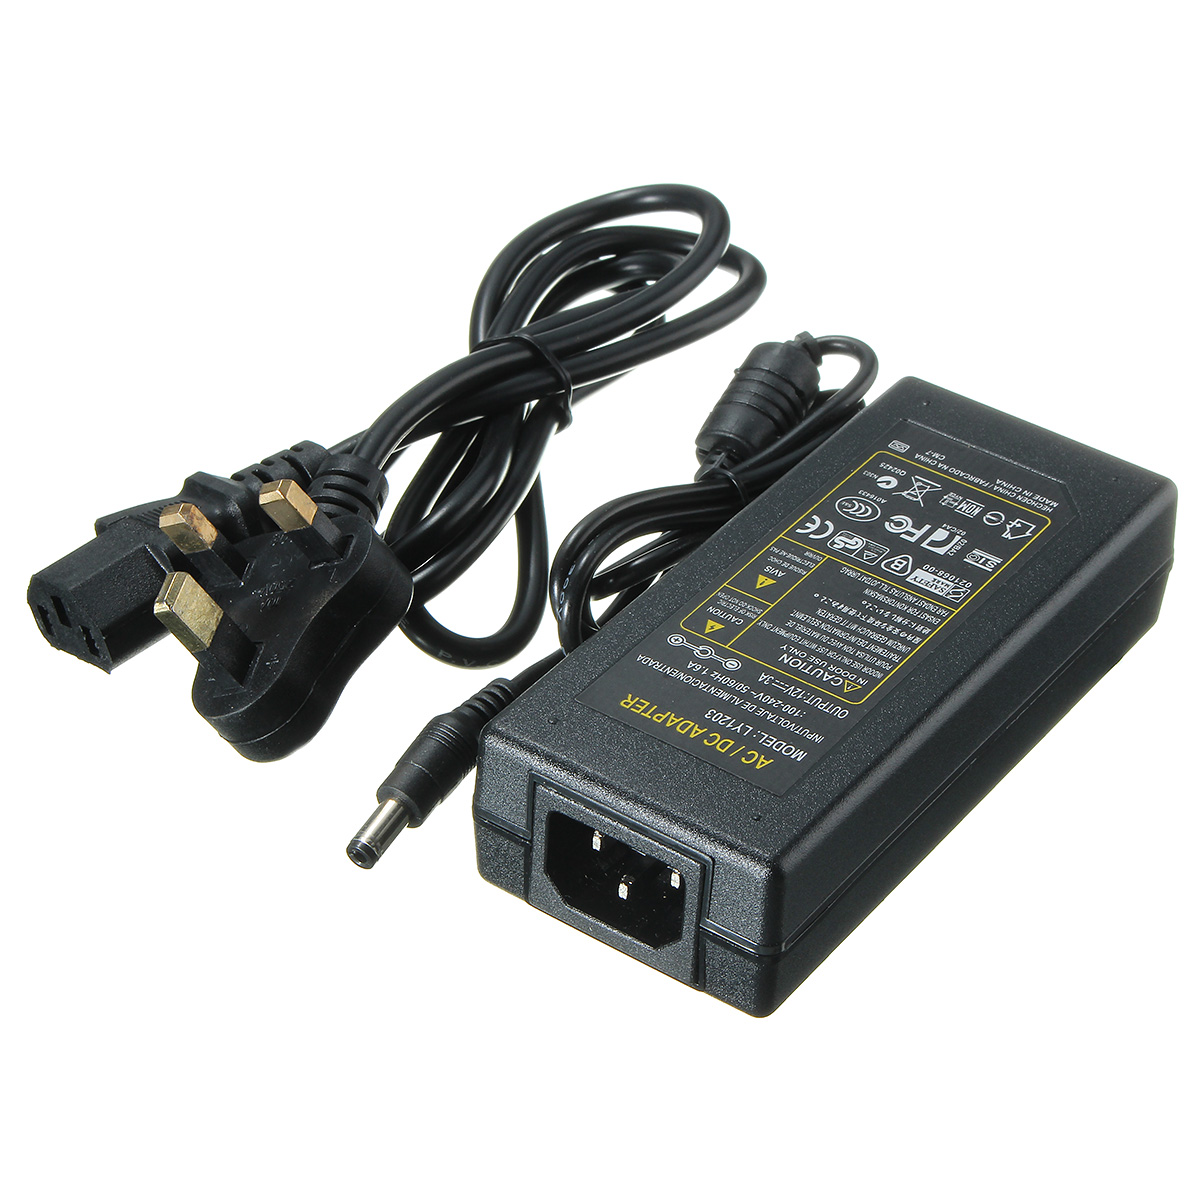 AC-100-240V-to-DC-12V-3A-36W-Power-Supply-Adapter-for-LED-Strip-86979-5